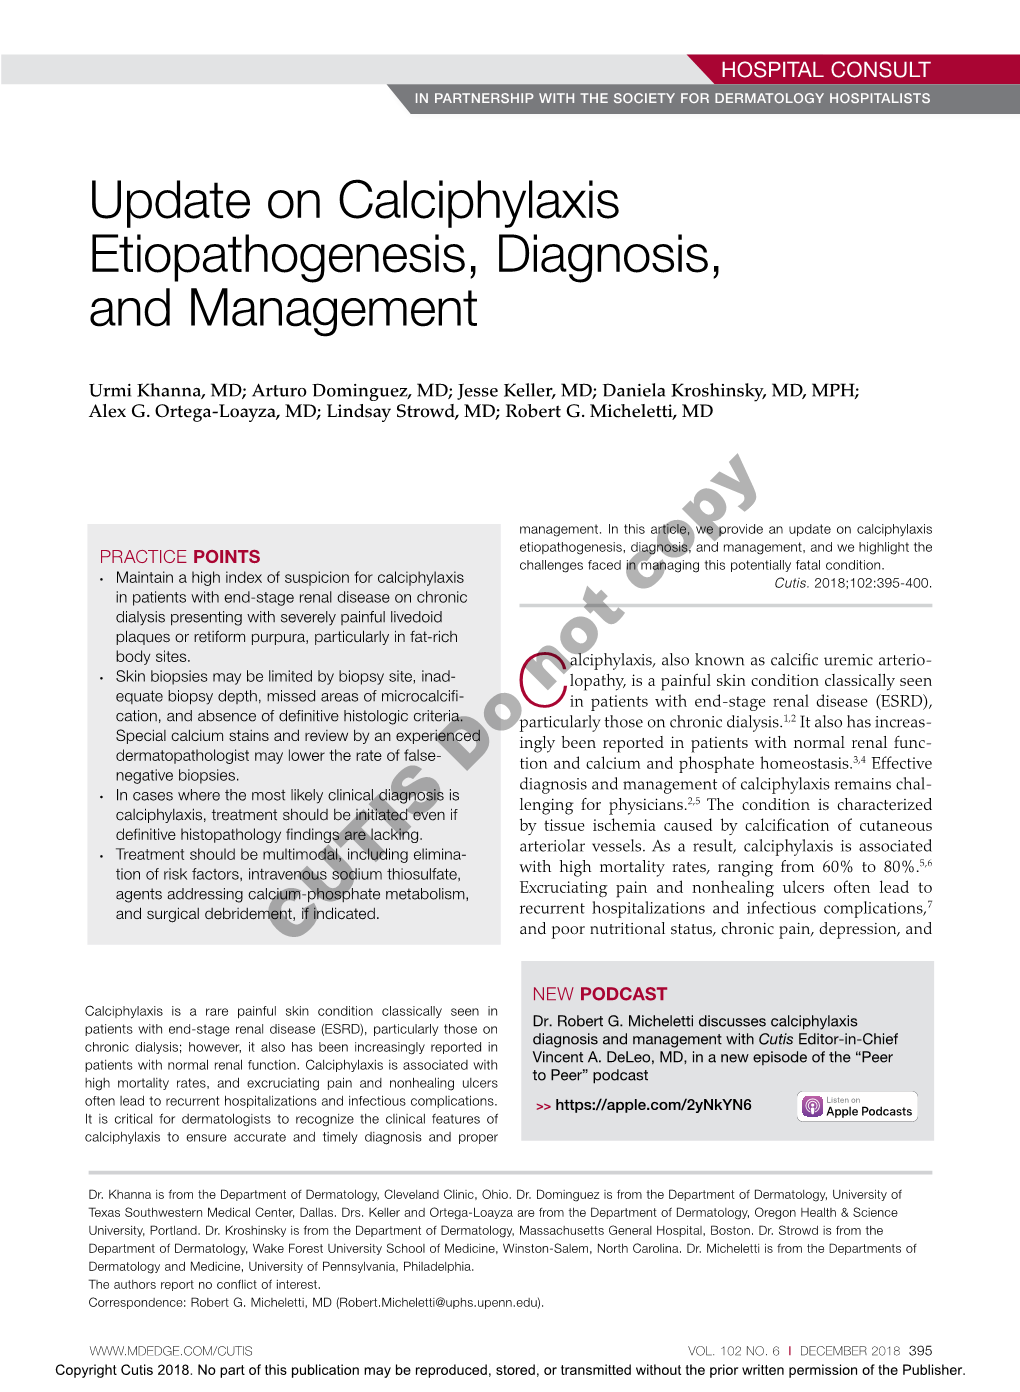 Update on Calciphylaxis Etiopathogenesis, Diagnosis, and Management